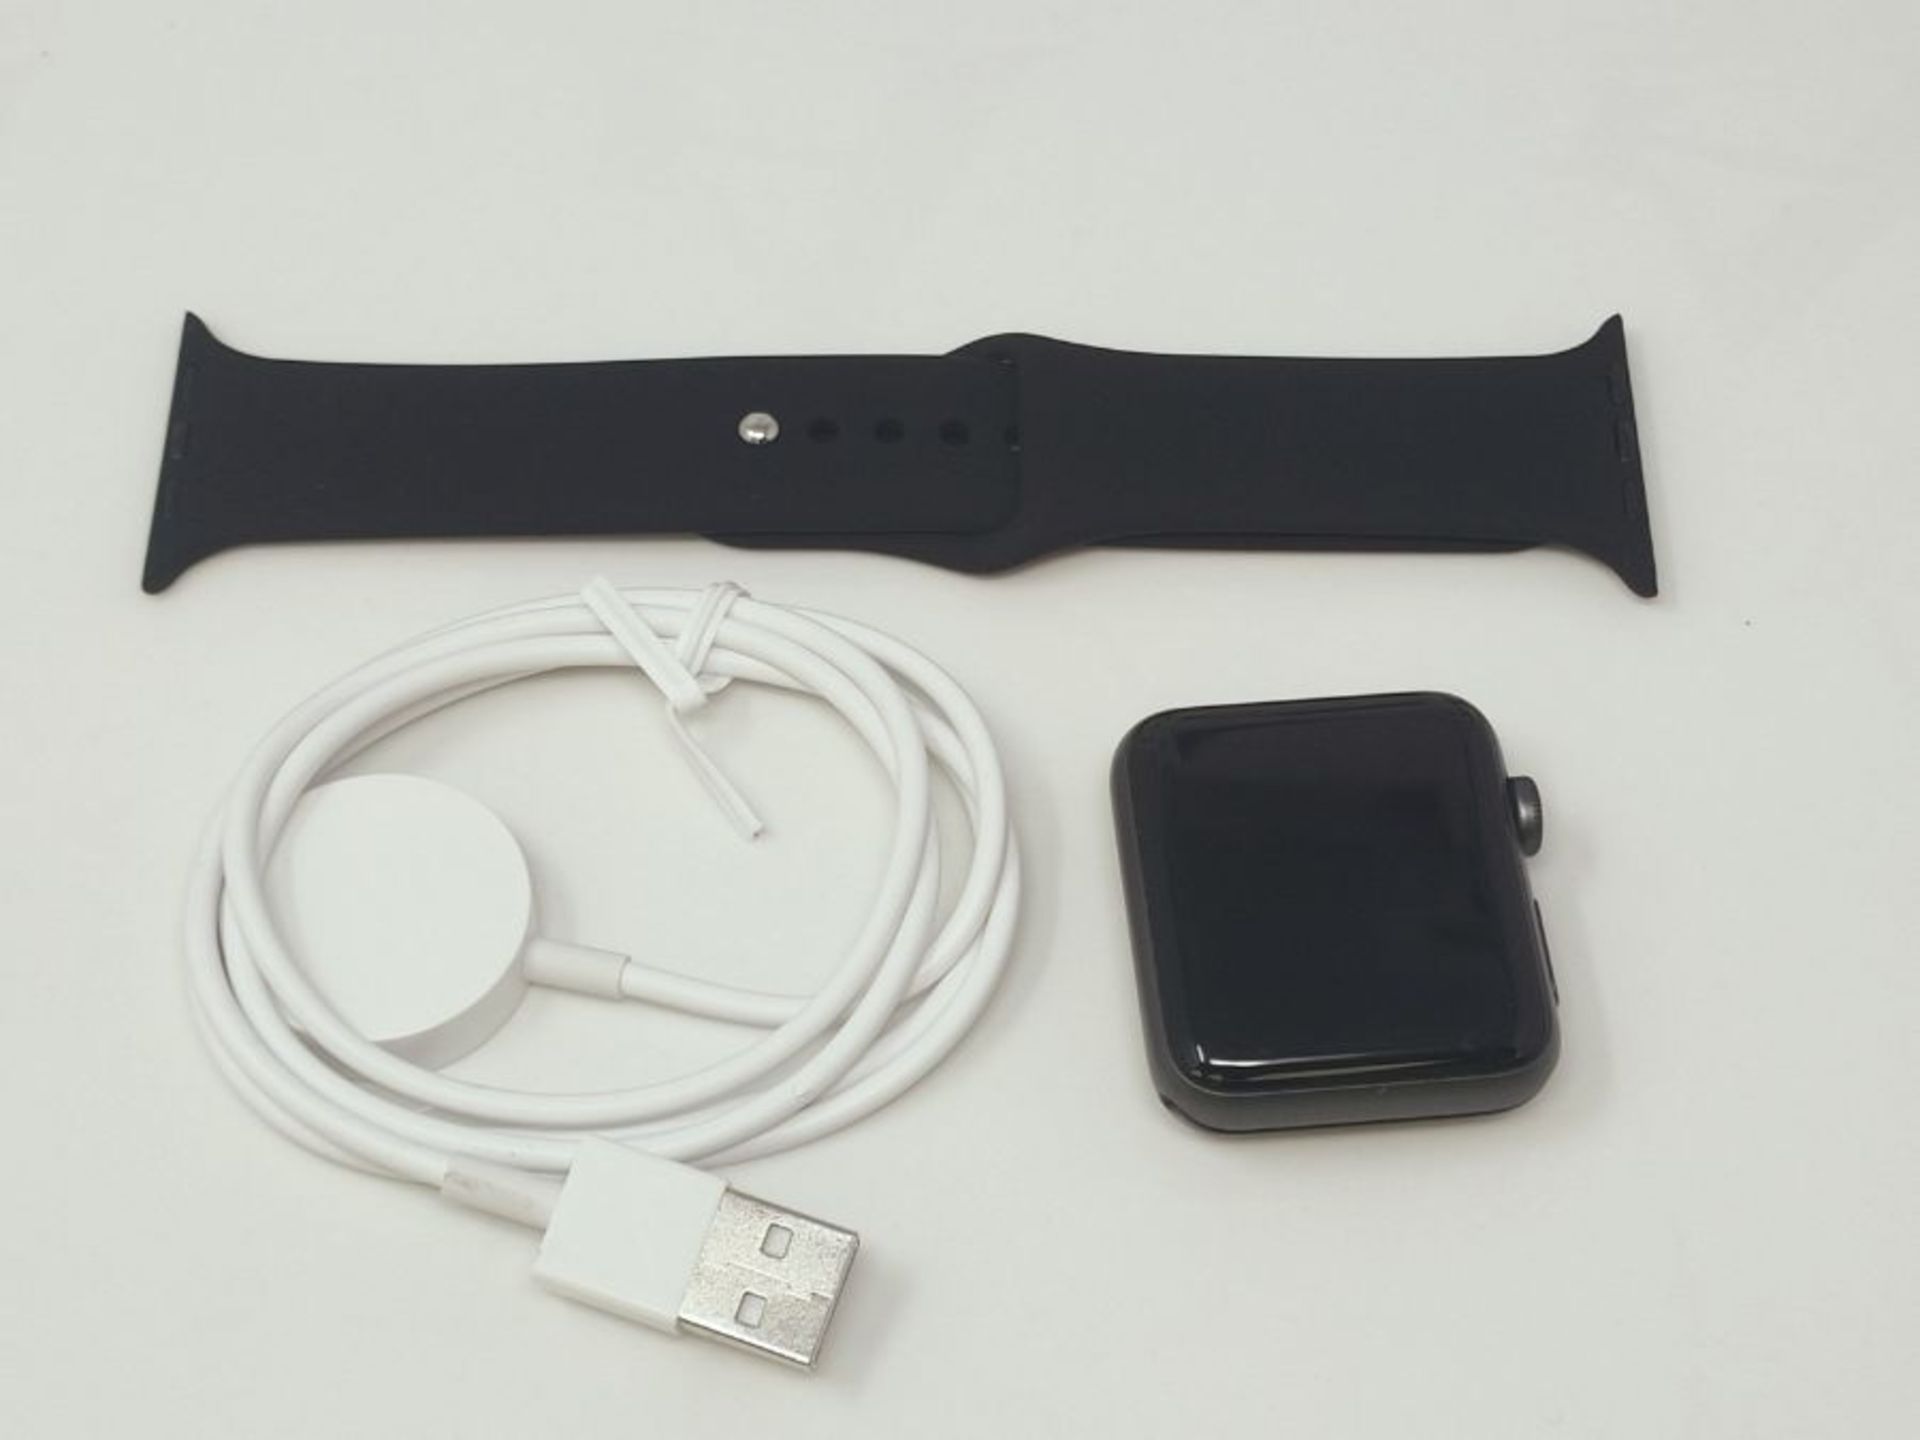 RRP £208.00 Apple Watch Series 3 (GPS, 42mm) - Space Grey Aluminum Case with Black Sport Band - Image 2 of 3